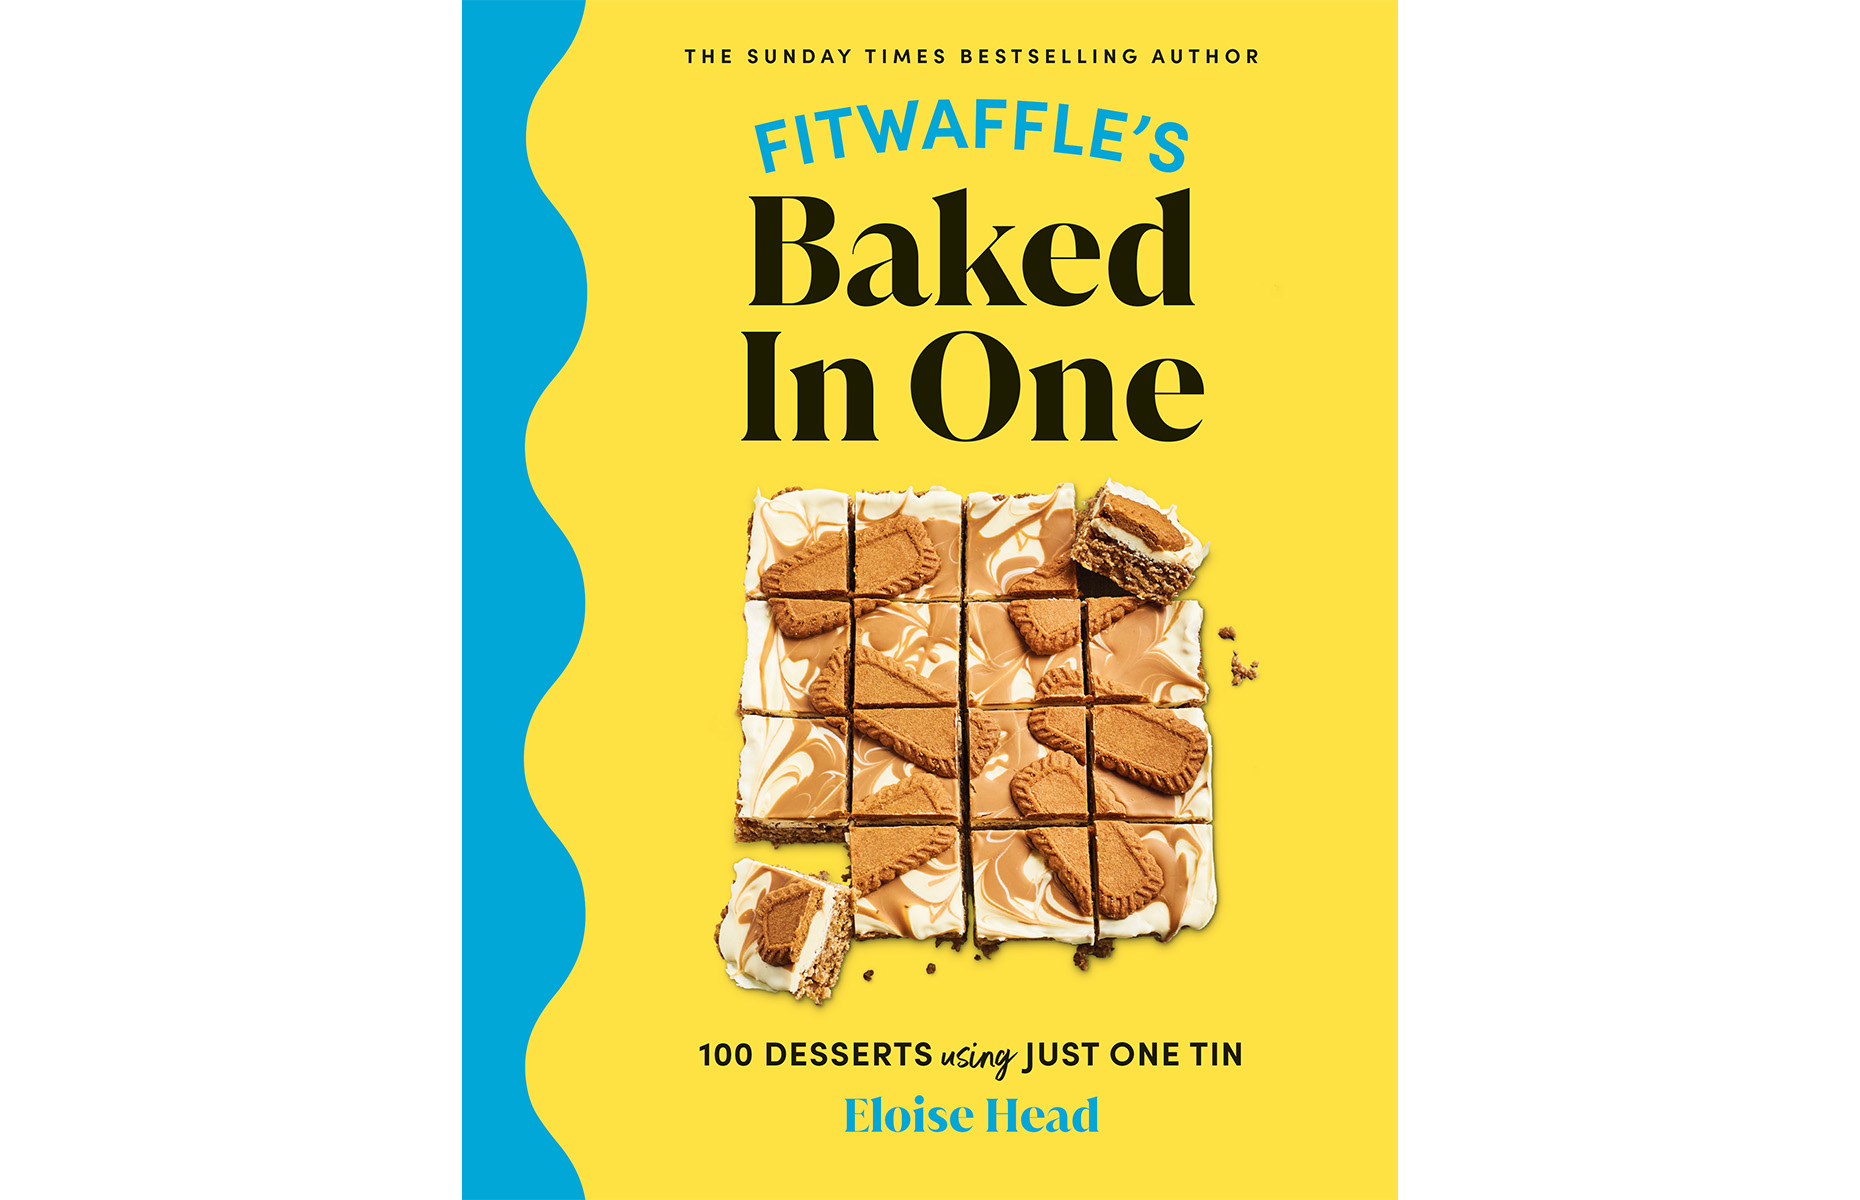 Fitwaffle's Baked In One